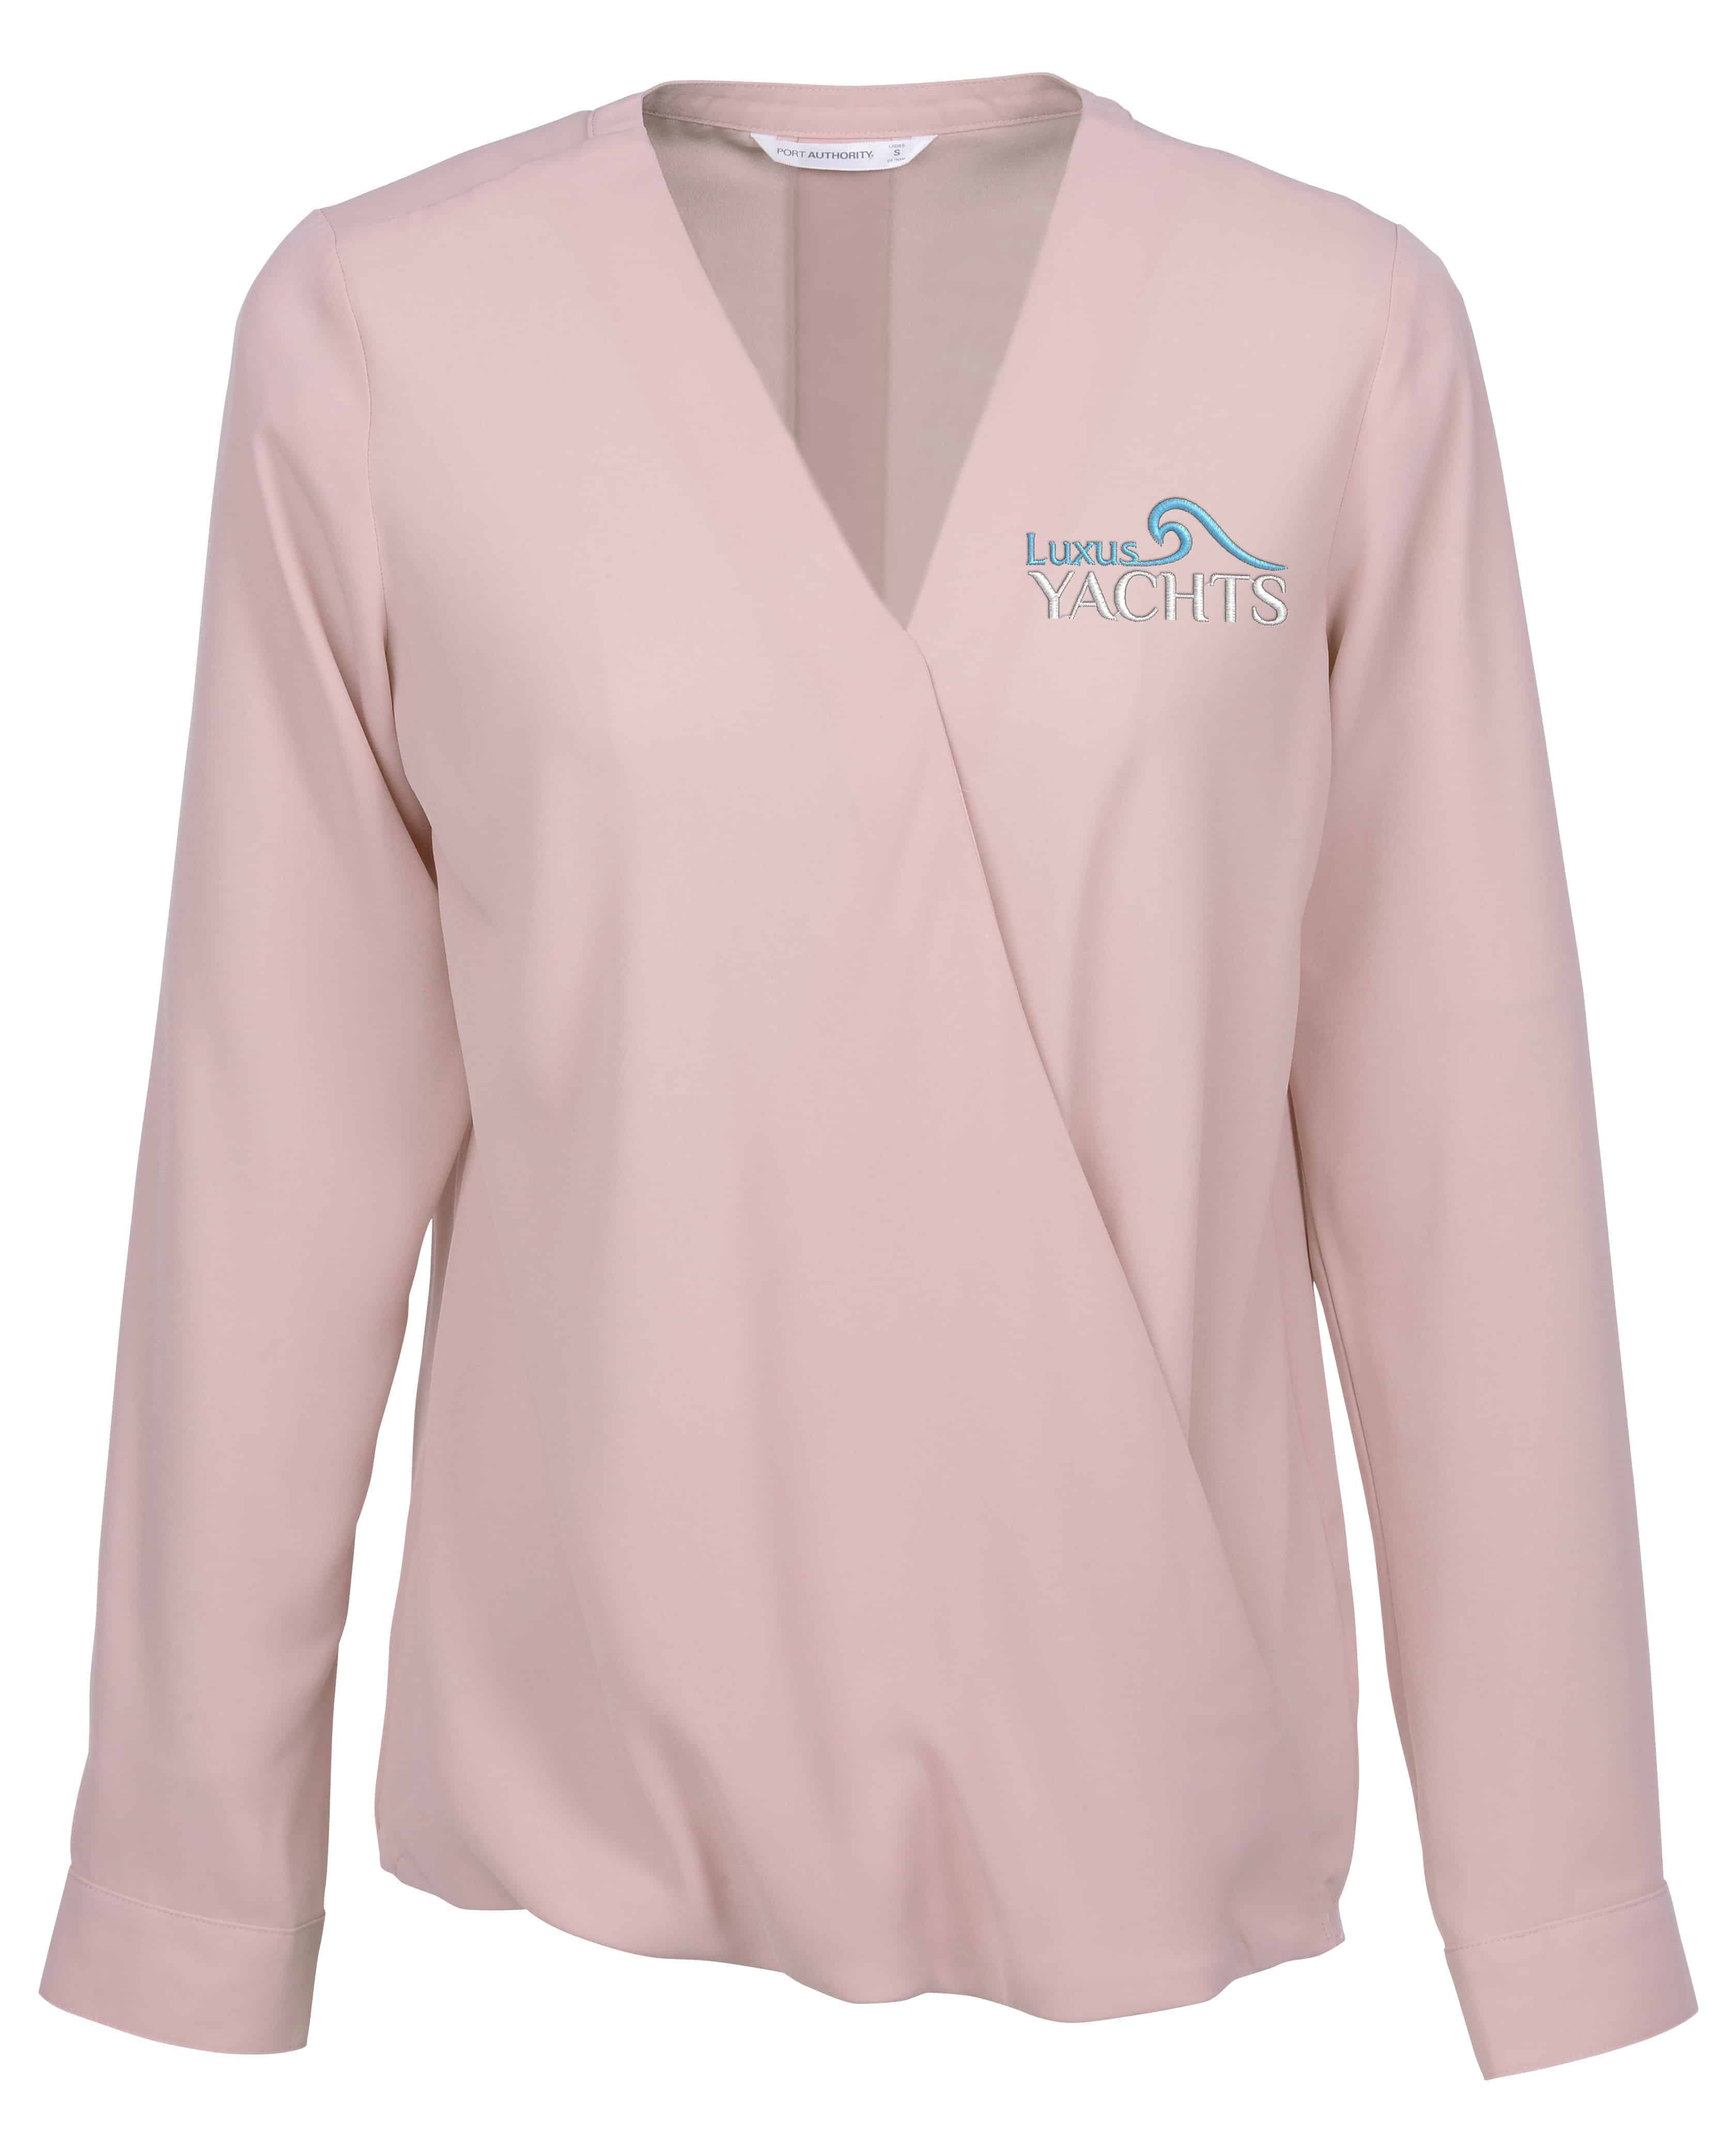 A Poly Crepe Crossover Blouse for women. 